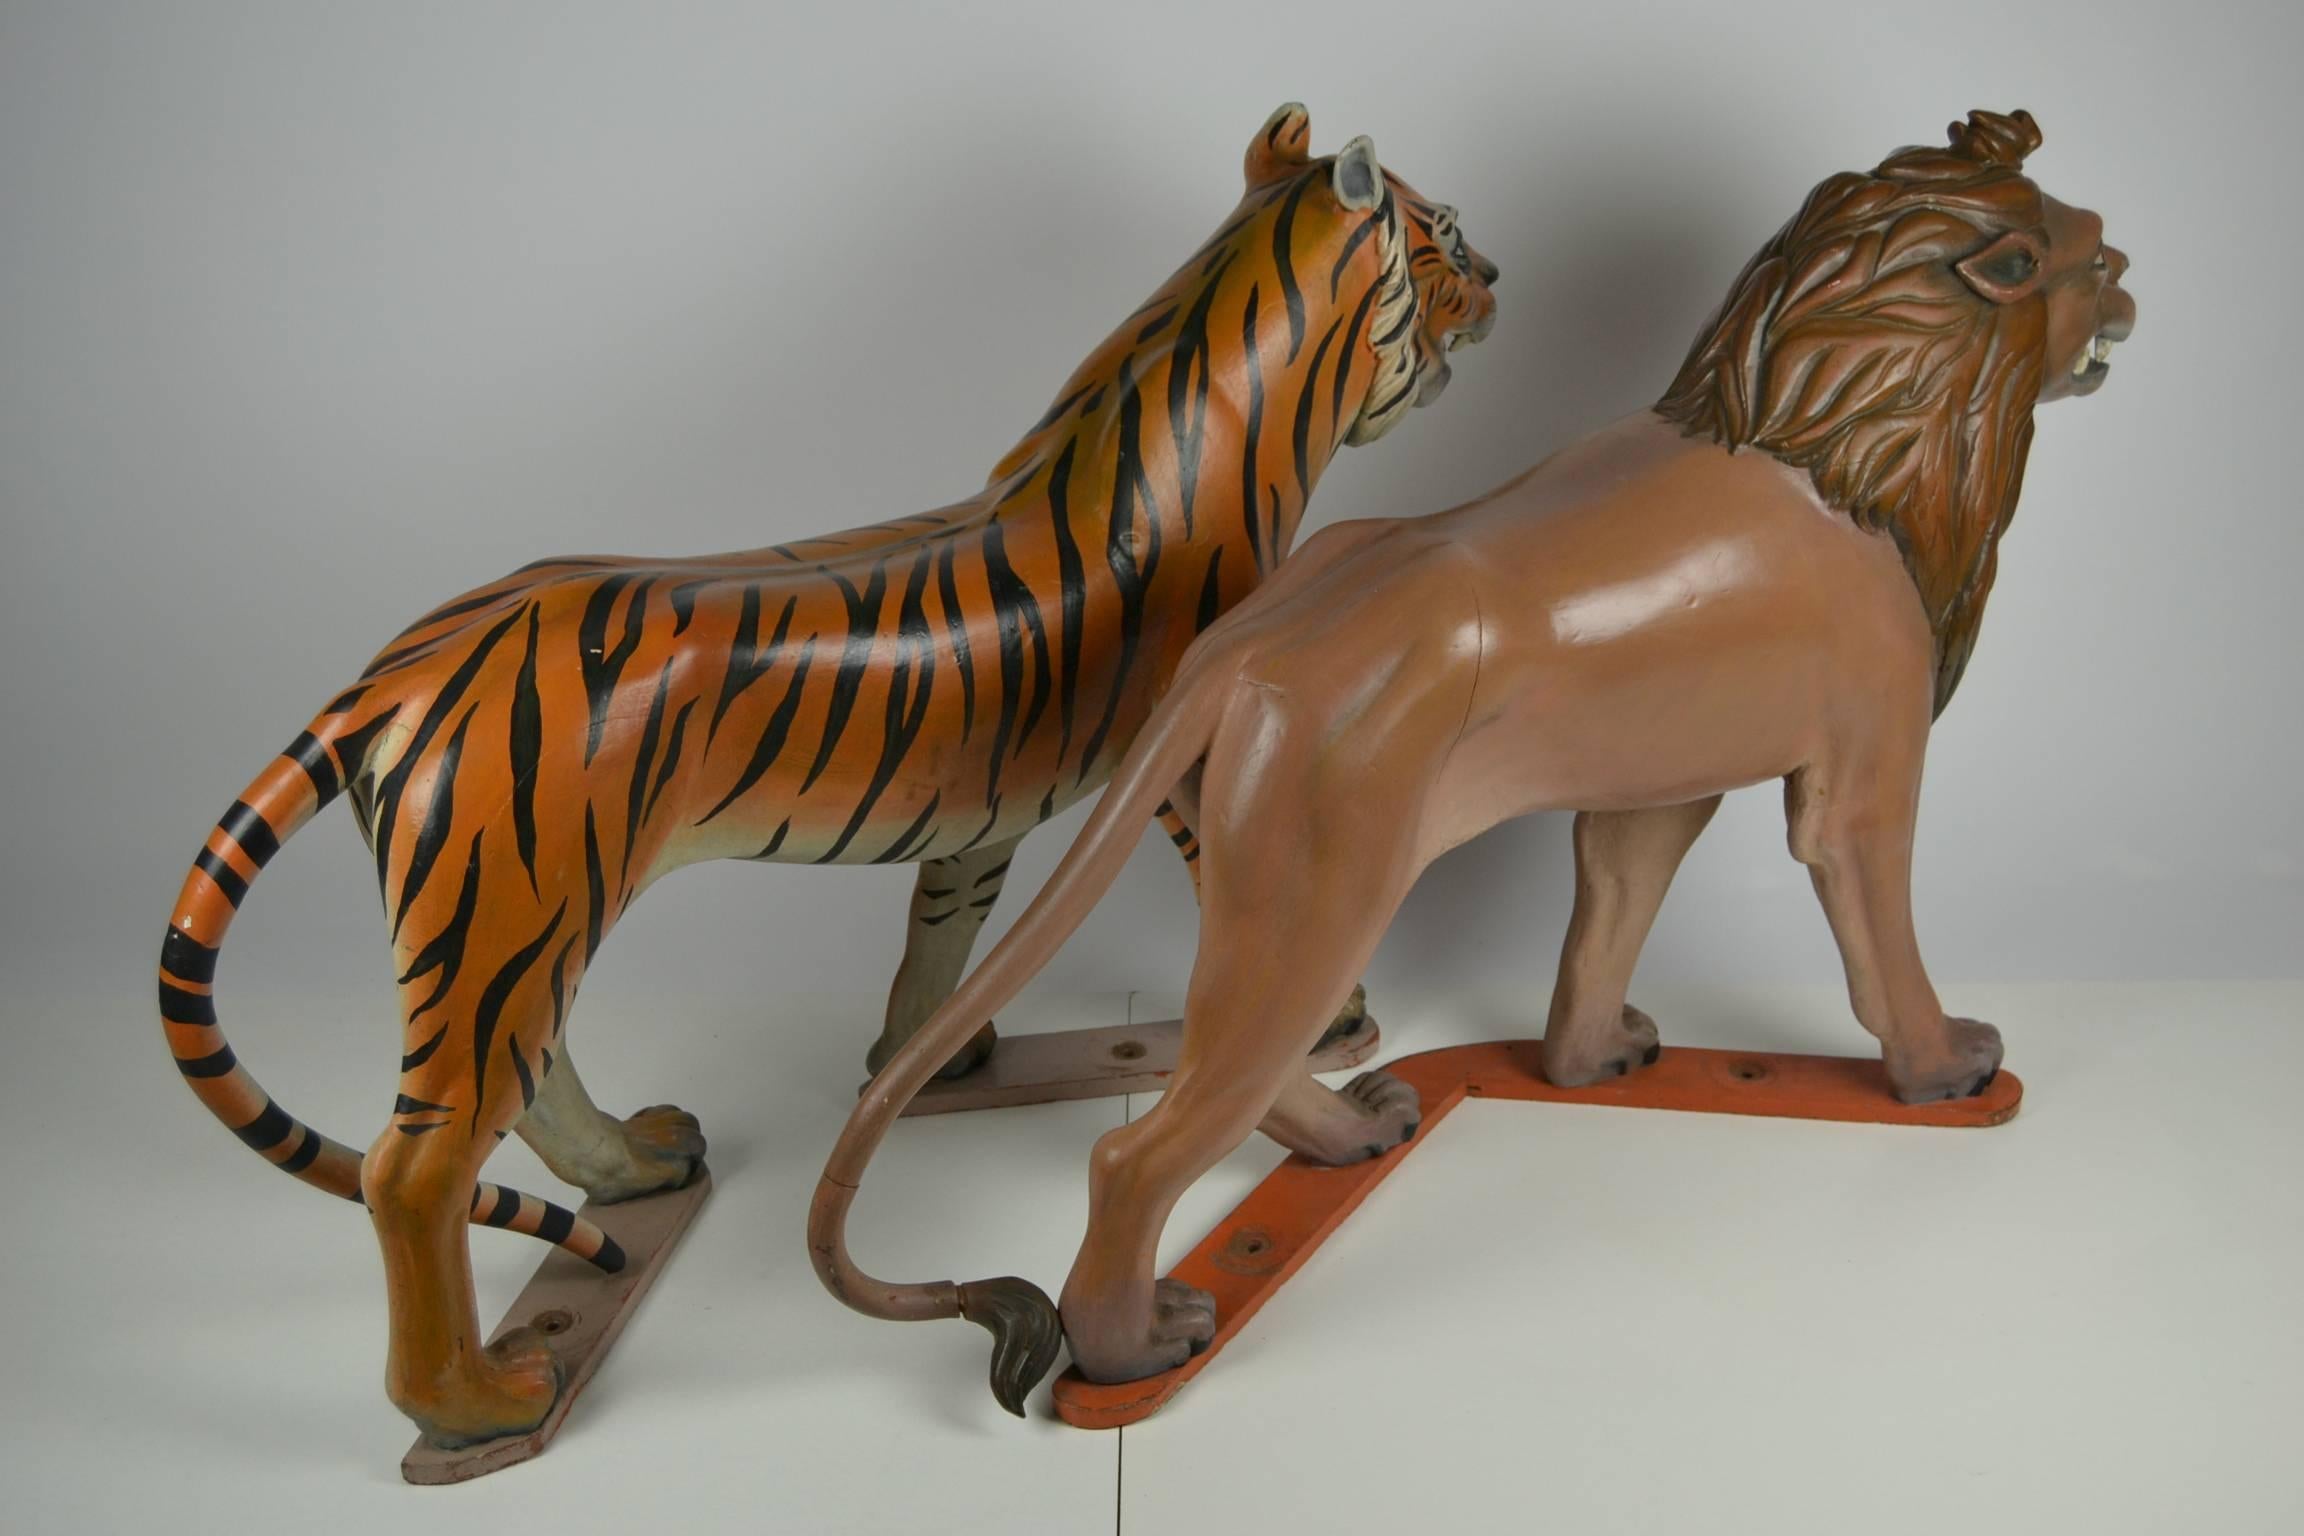 Lion and Tiger Sculptures from Carousel, Wood, Europe, Mid-20th Century 11